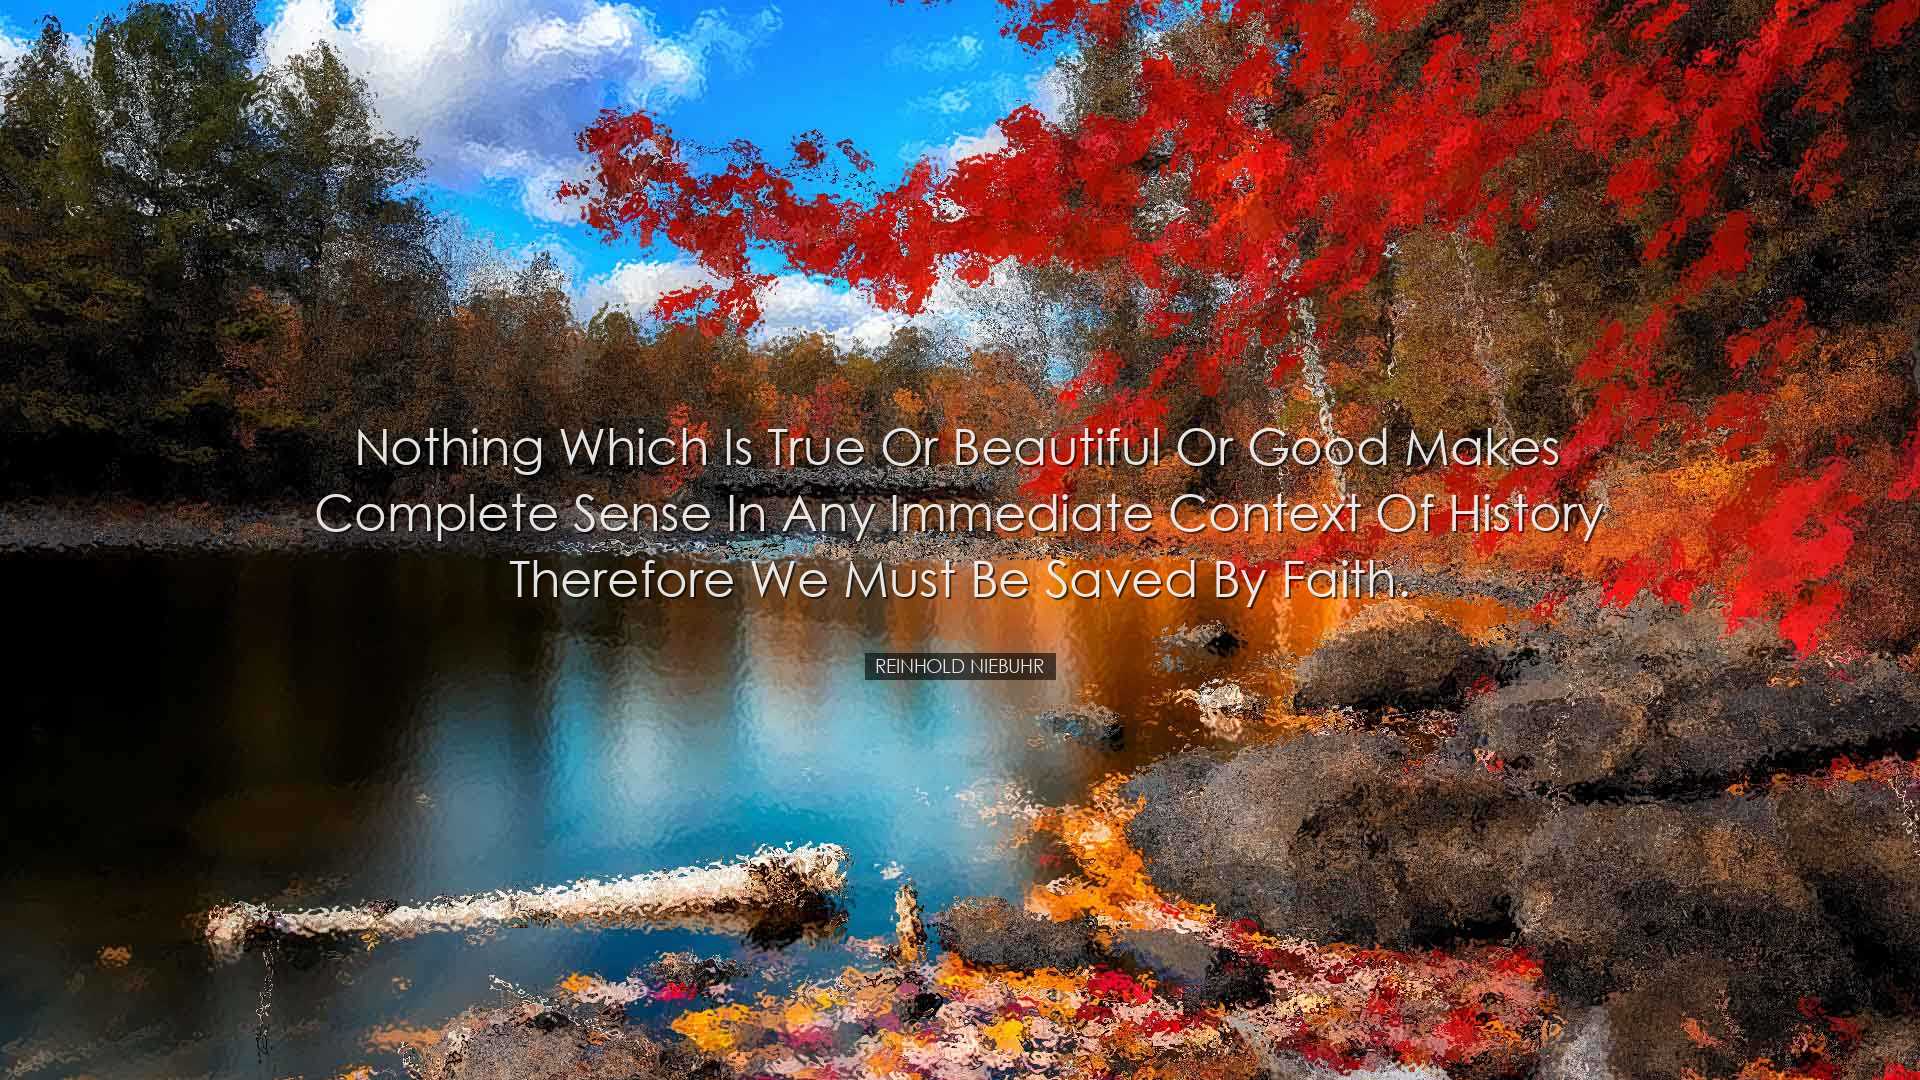 Nothing which is true or beautiful or good makes complete sense in